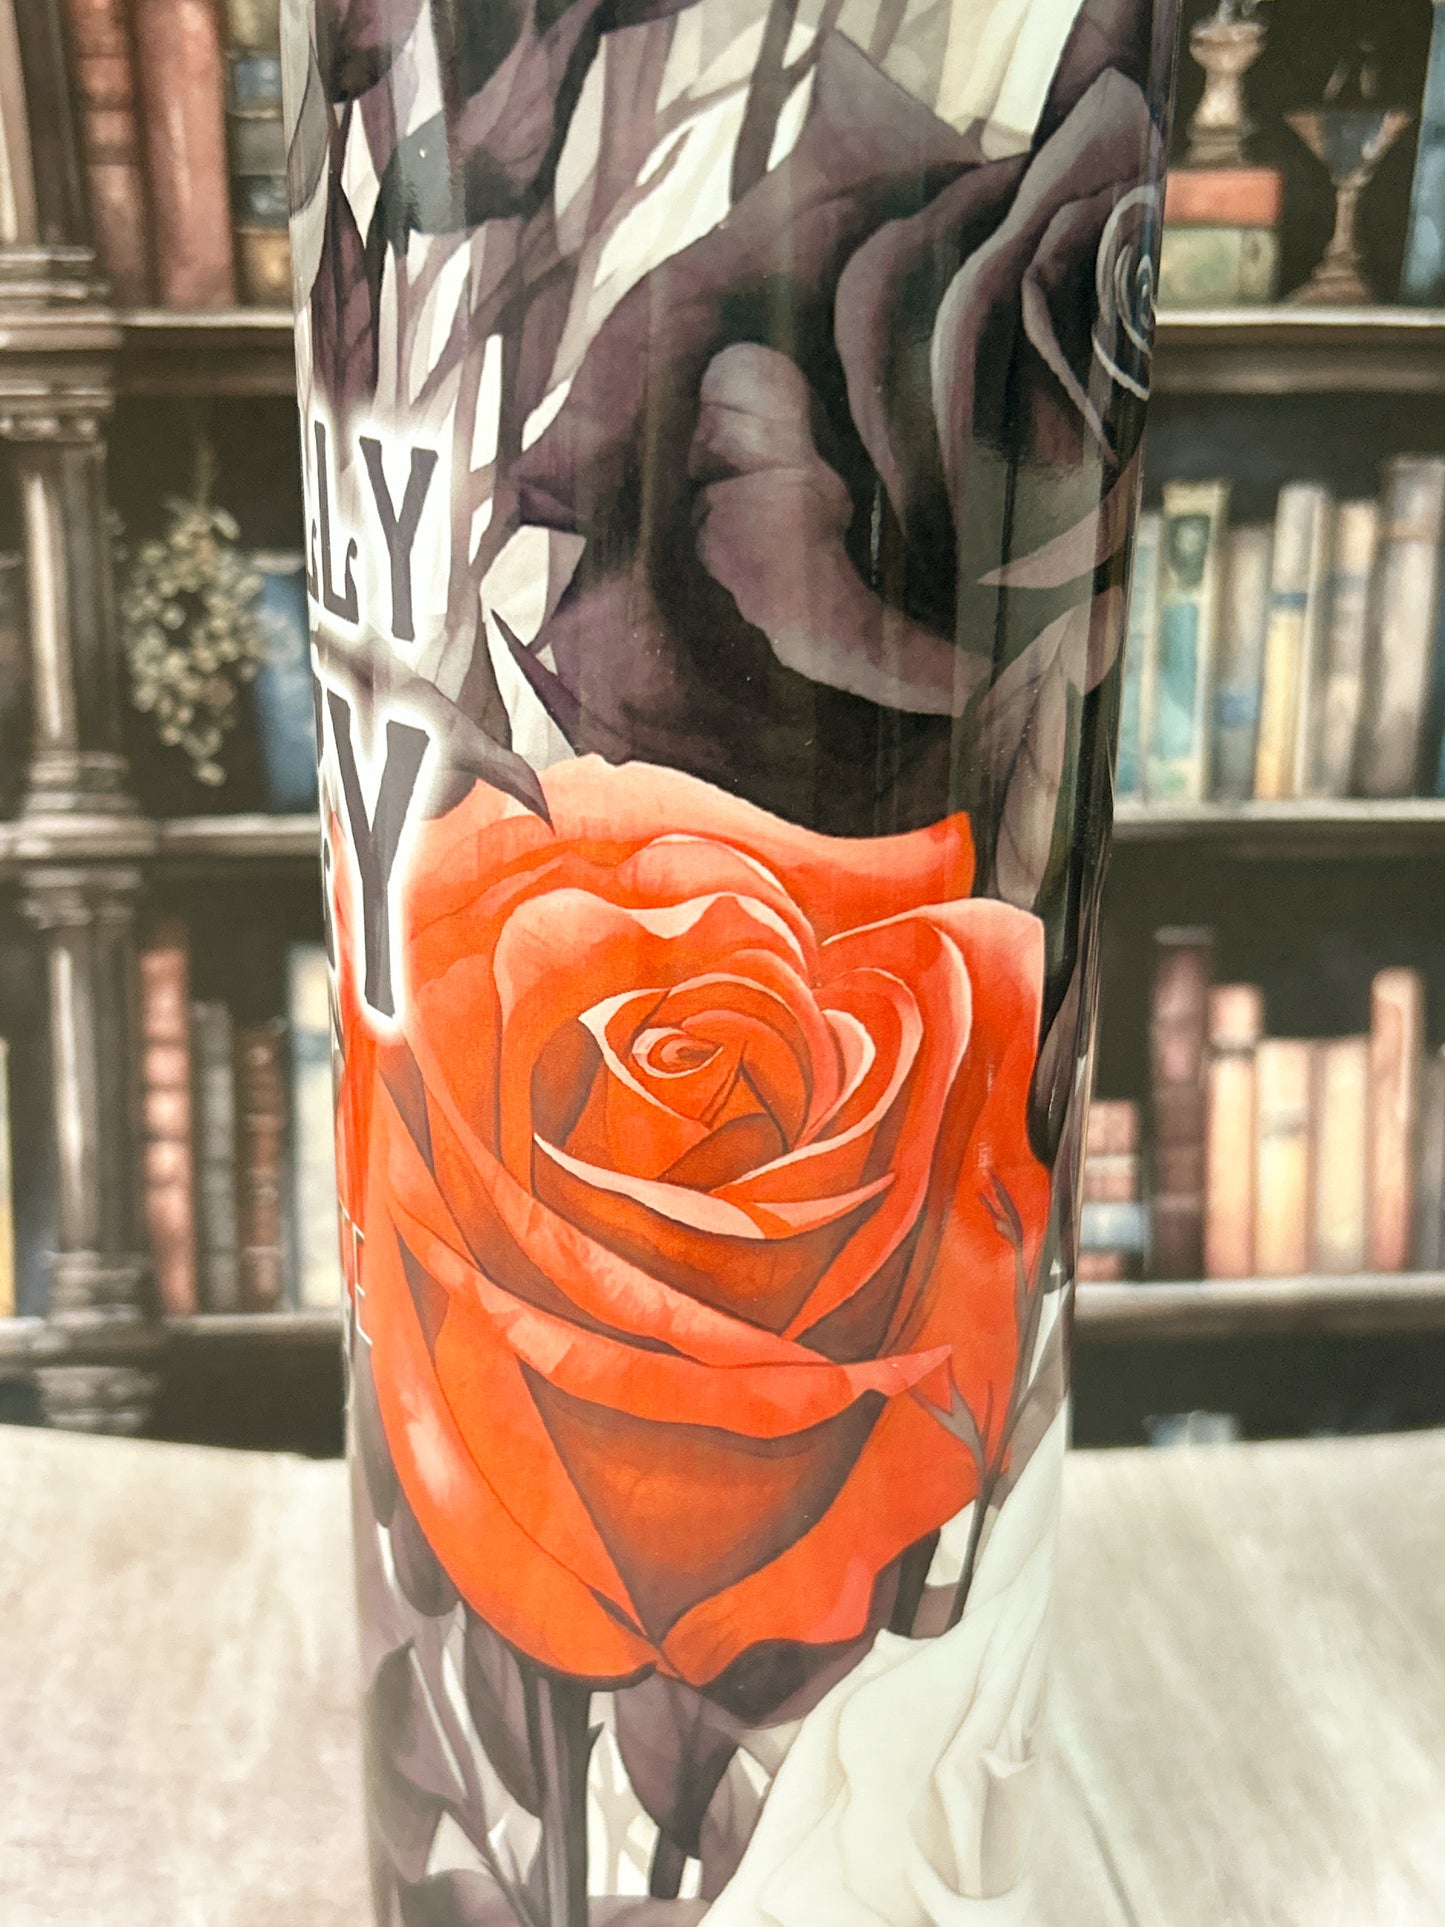 Morally Grey is My Favorite Color Personalized Tumbler